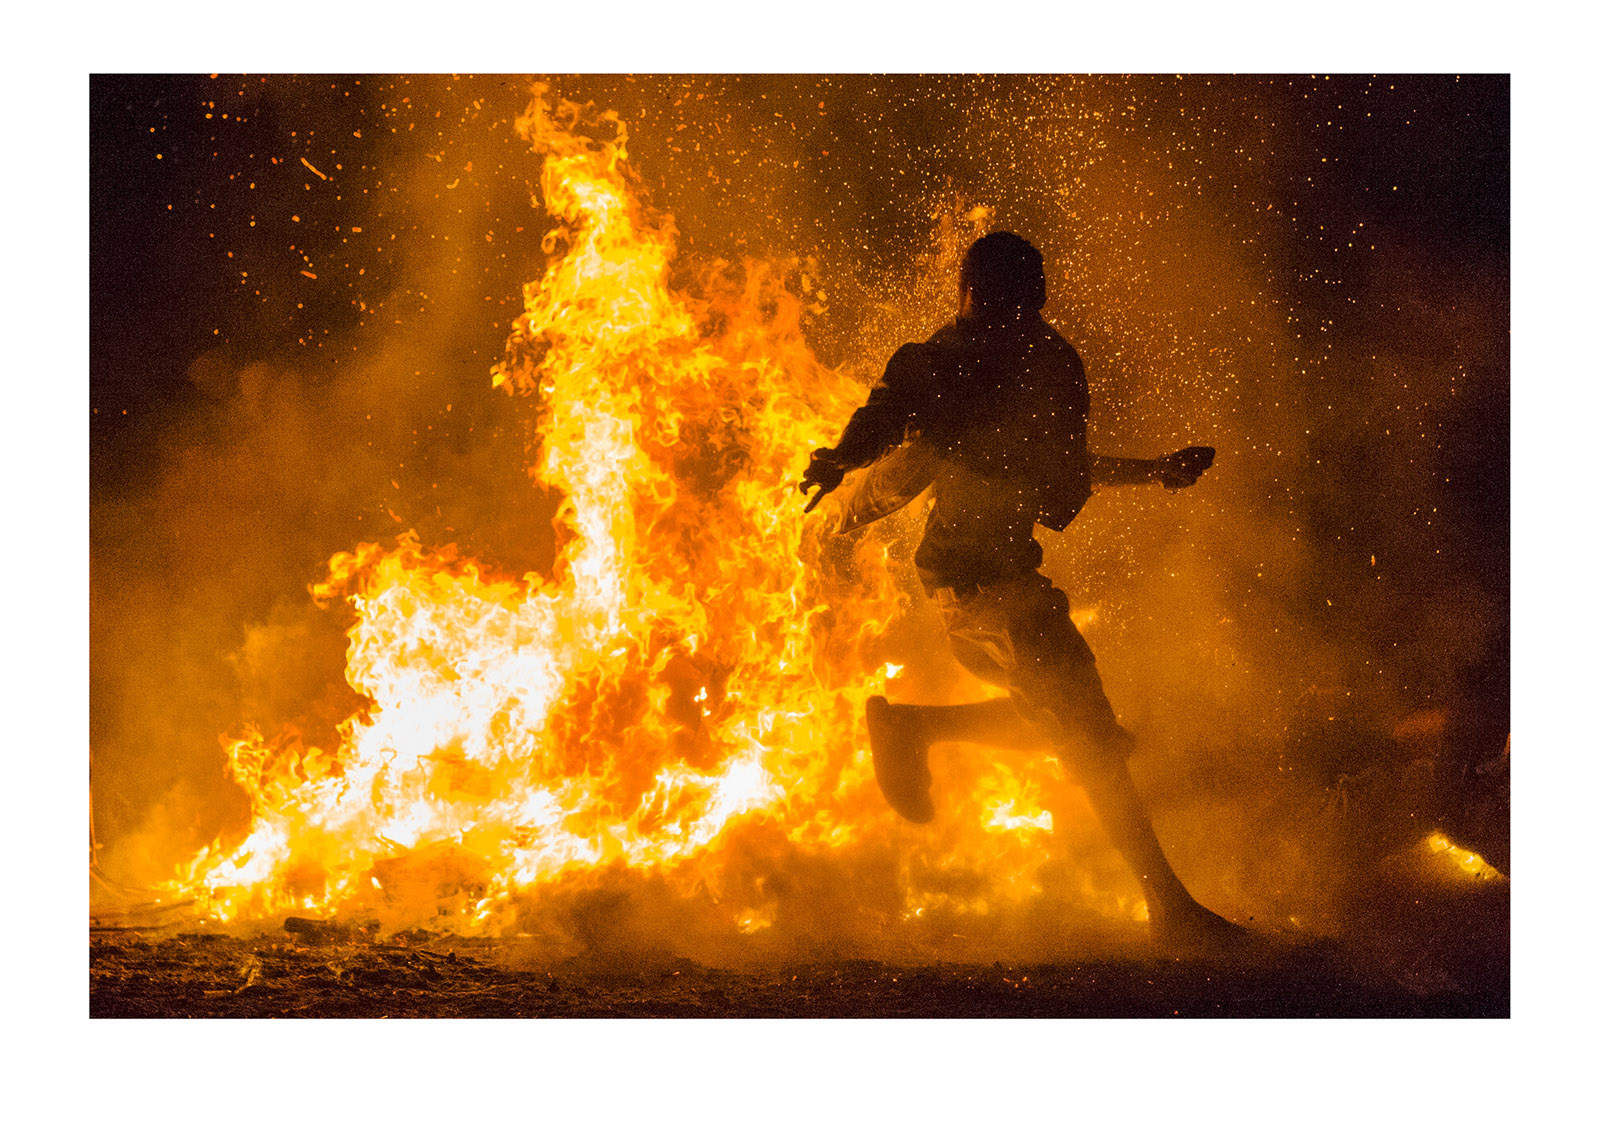 A villager taunts the flames and their gods during a tribal fire ceremony. Rabaul, New Britain, Papua New Guinea.